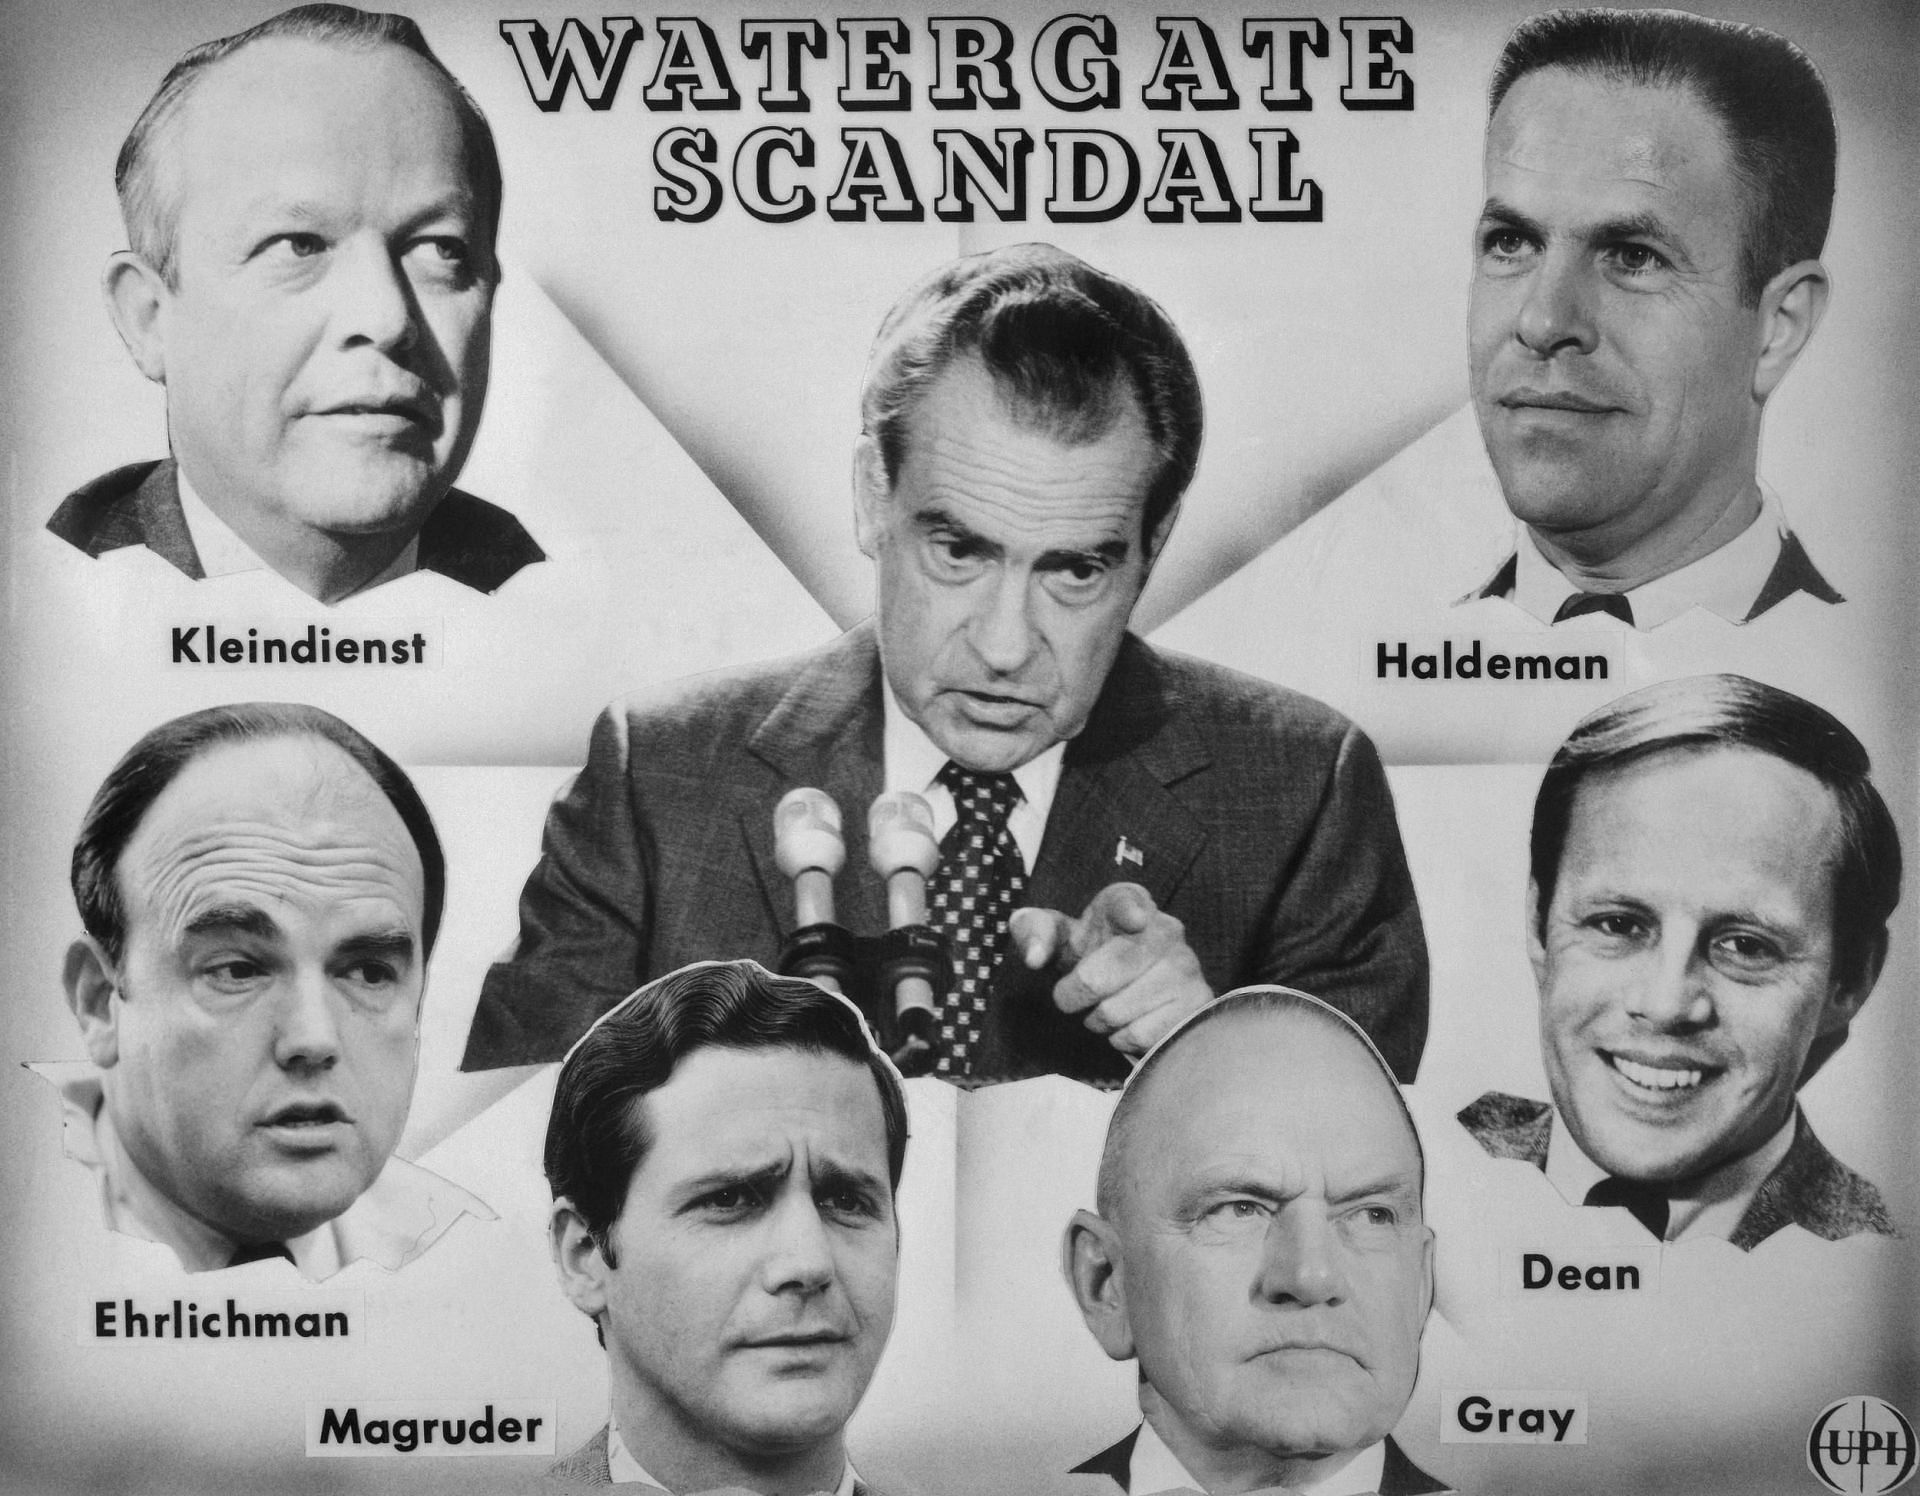 U.S. President Richard Nixon and top administration officials who resigned due to Watergate (Image via Getty)